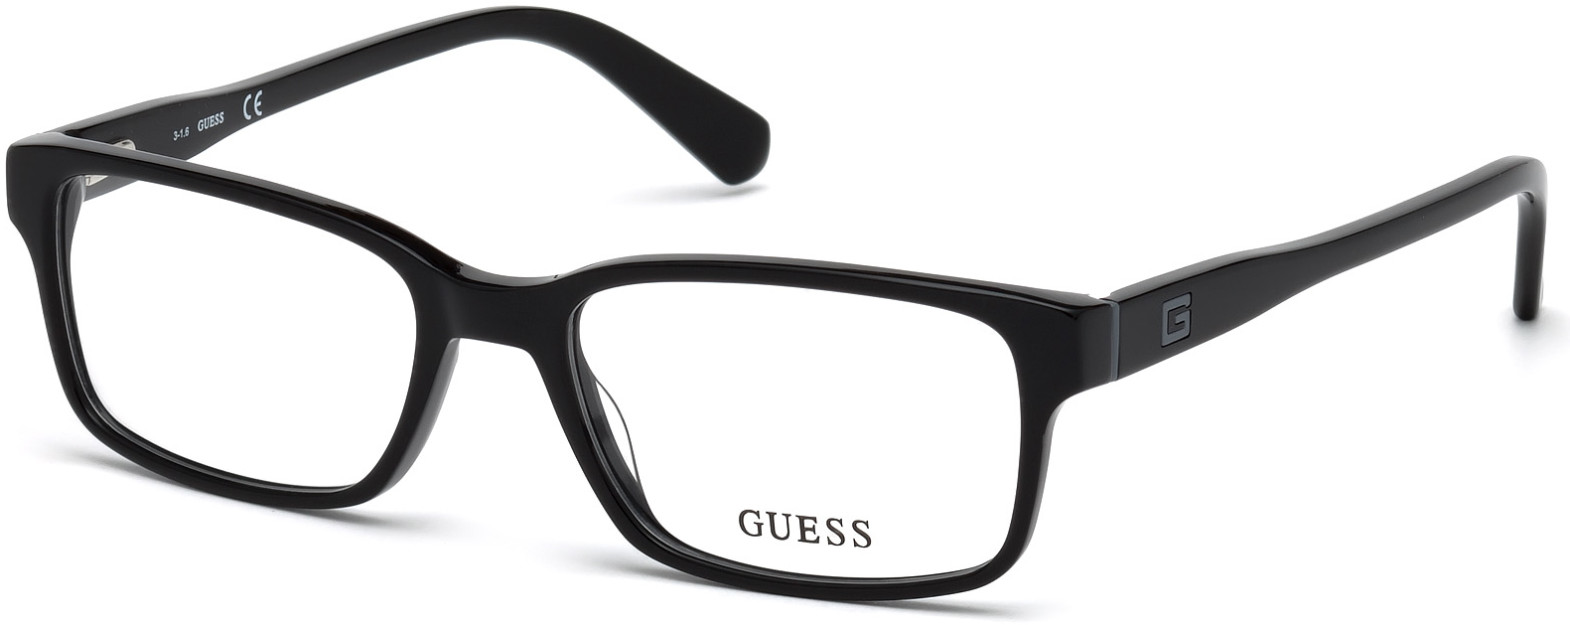 GUESS 1906 001